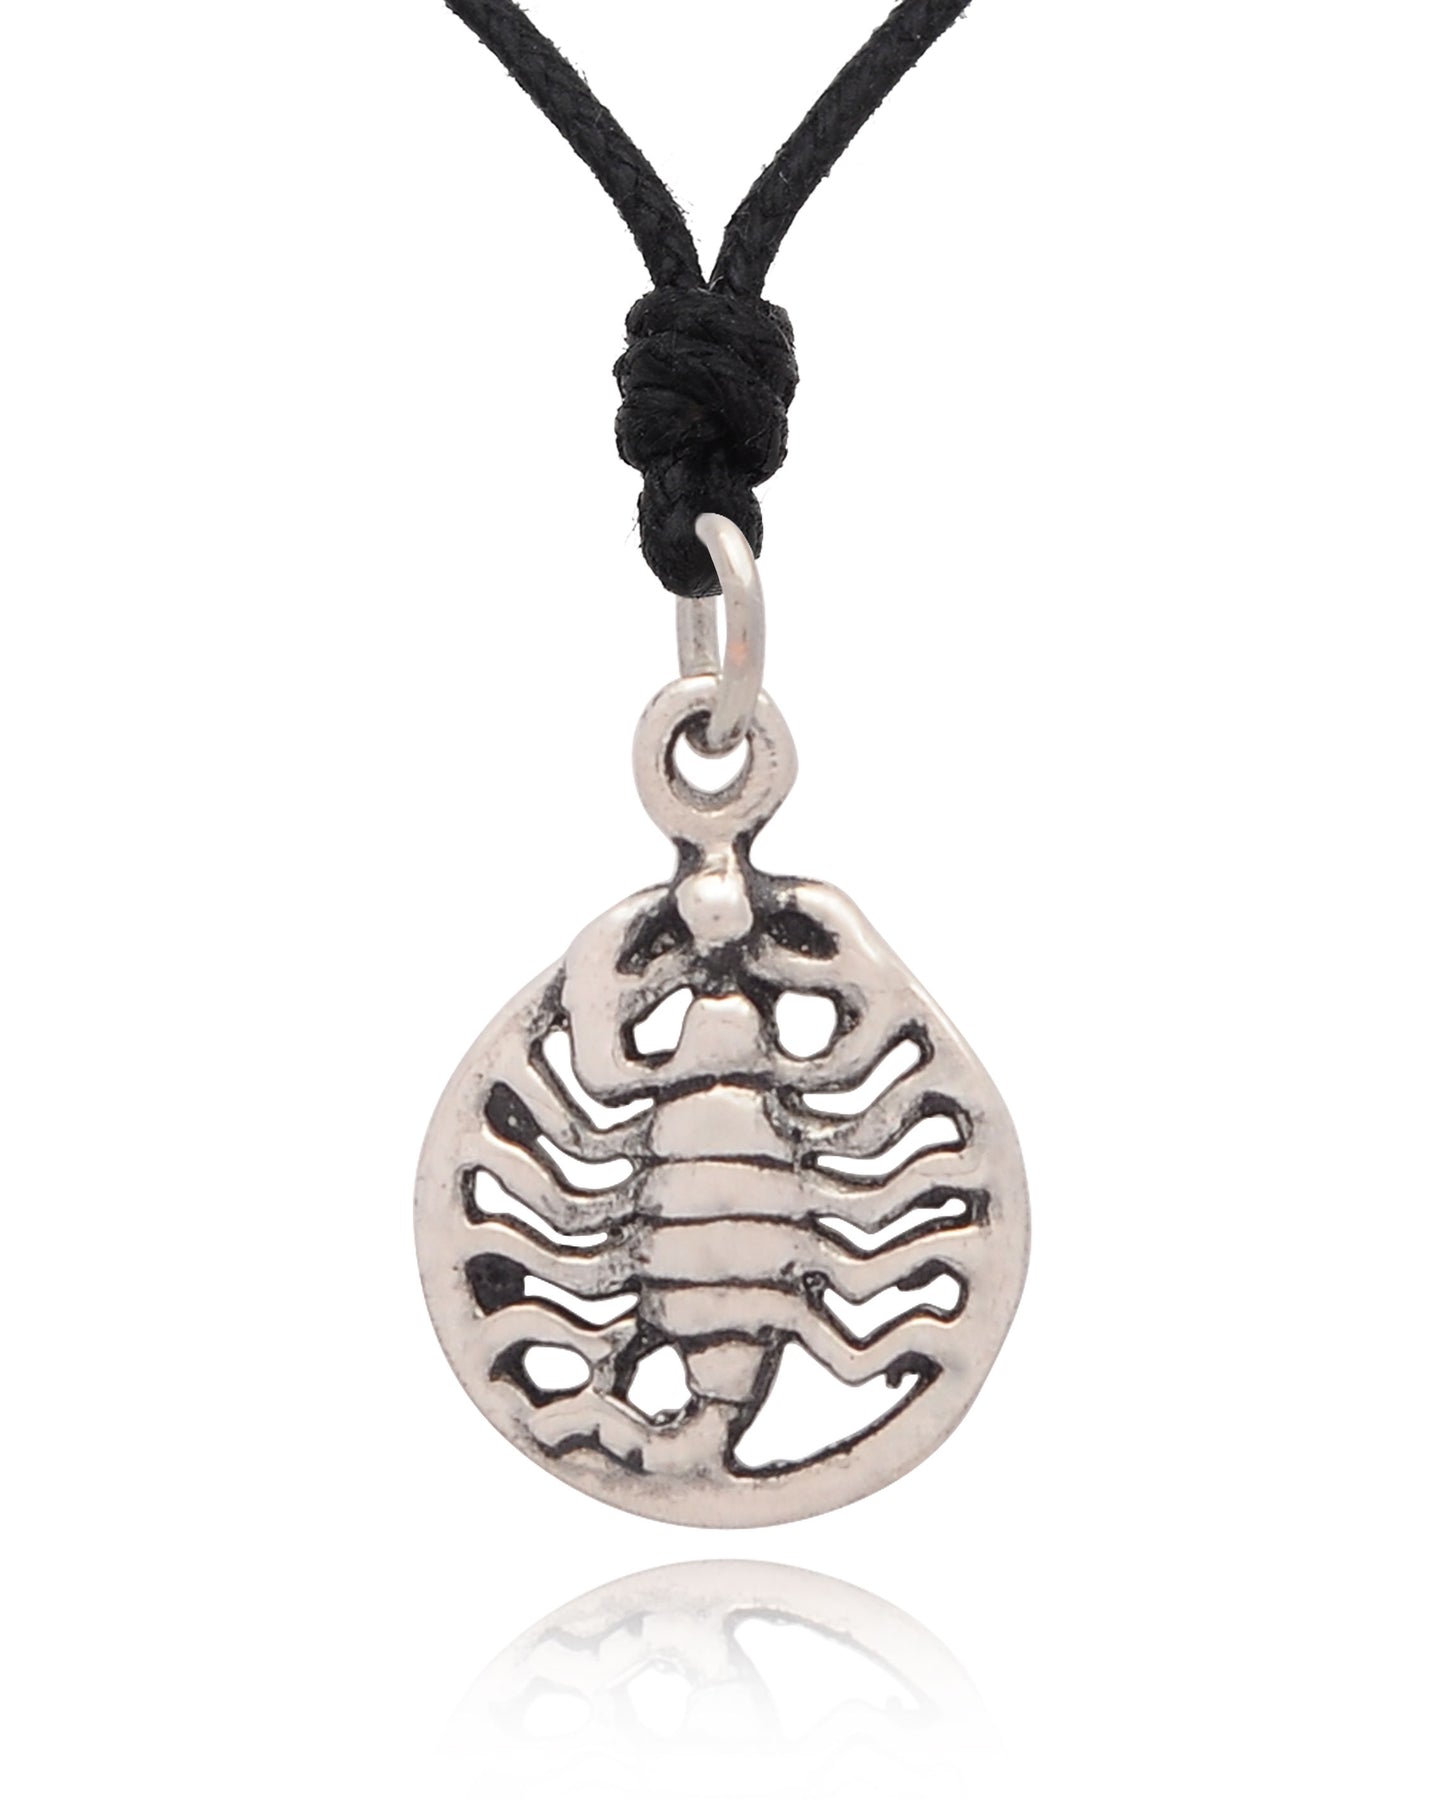 New Handmade Scorpion Silver Pewter Necklace Pendant Jewelry